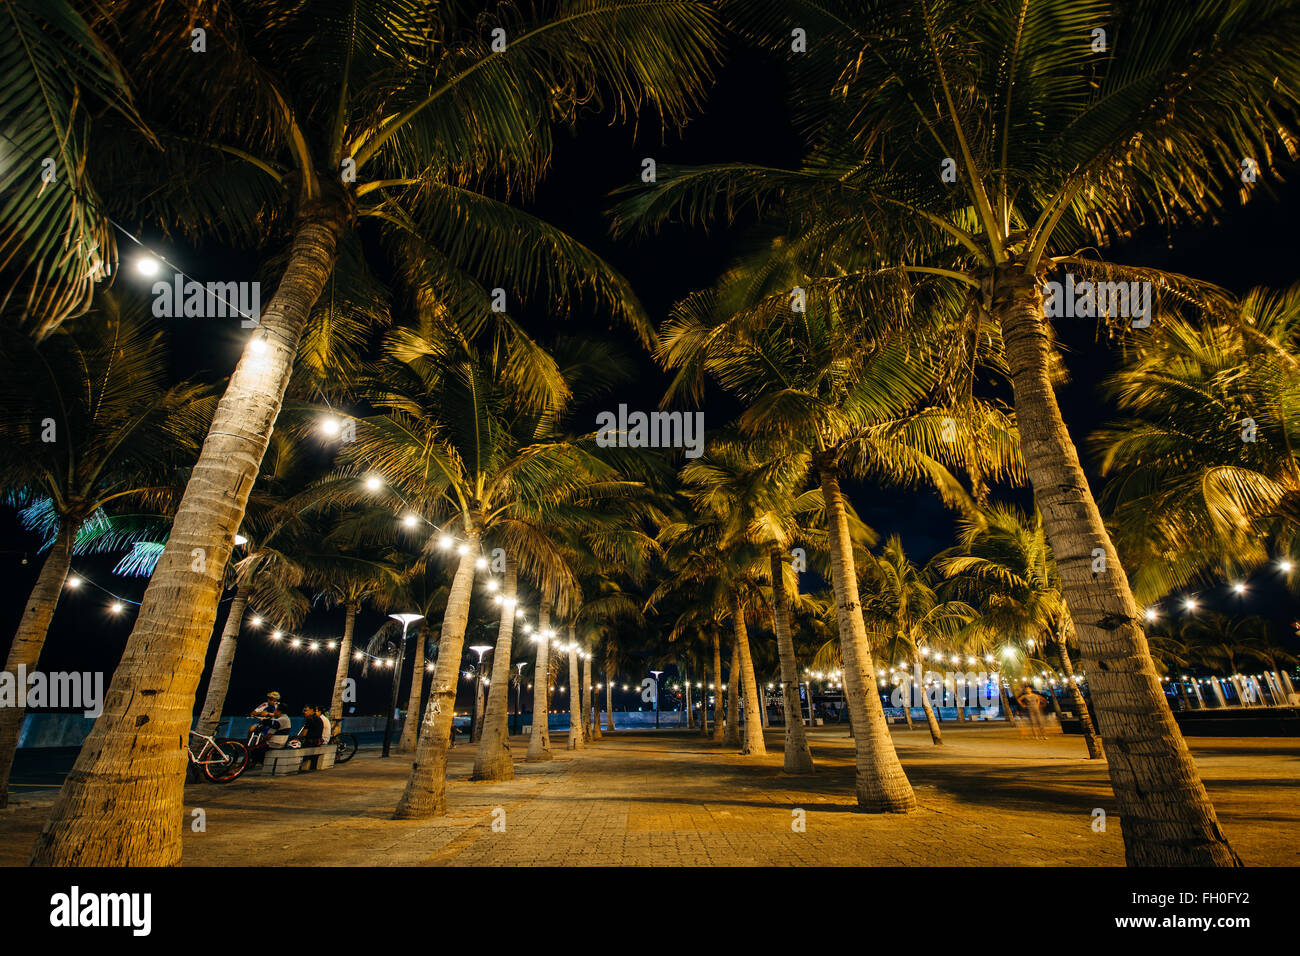 Palm trees at night, in Pasay, Metro Manila, The Philippines. Stock Photo